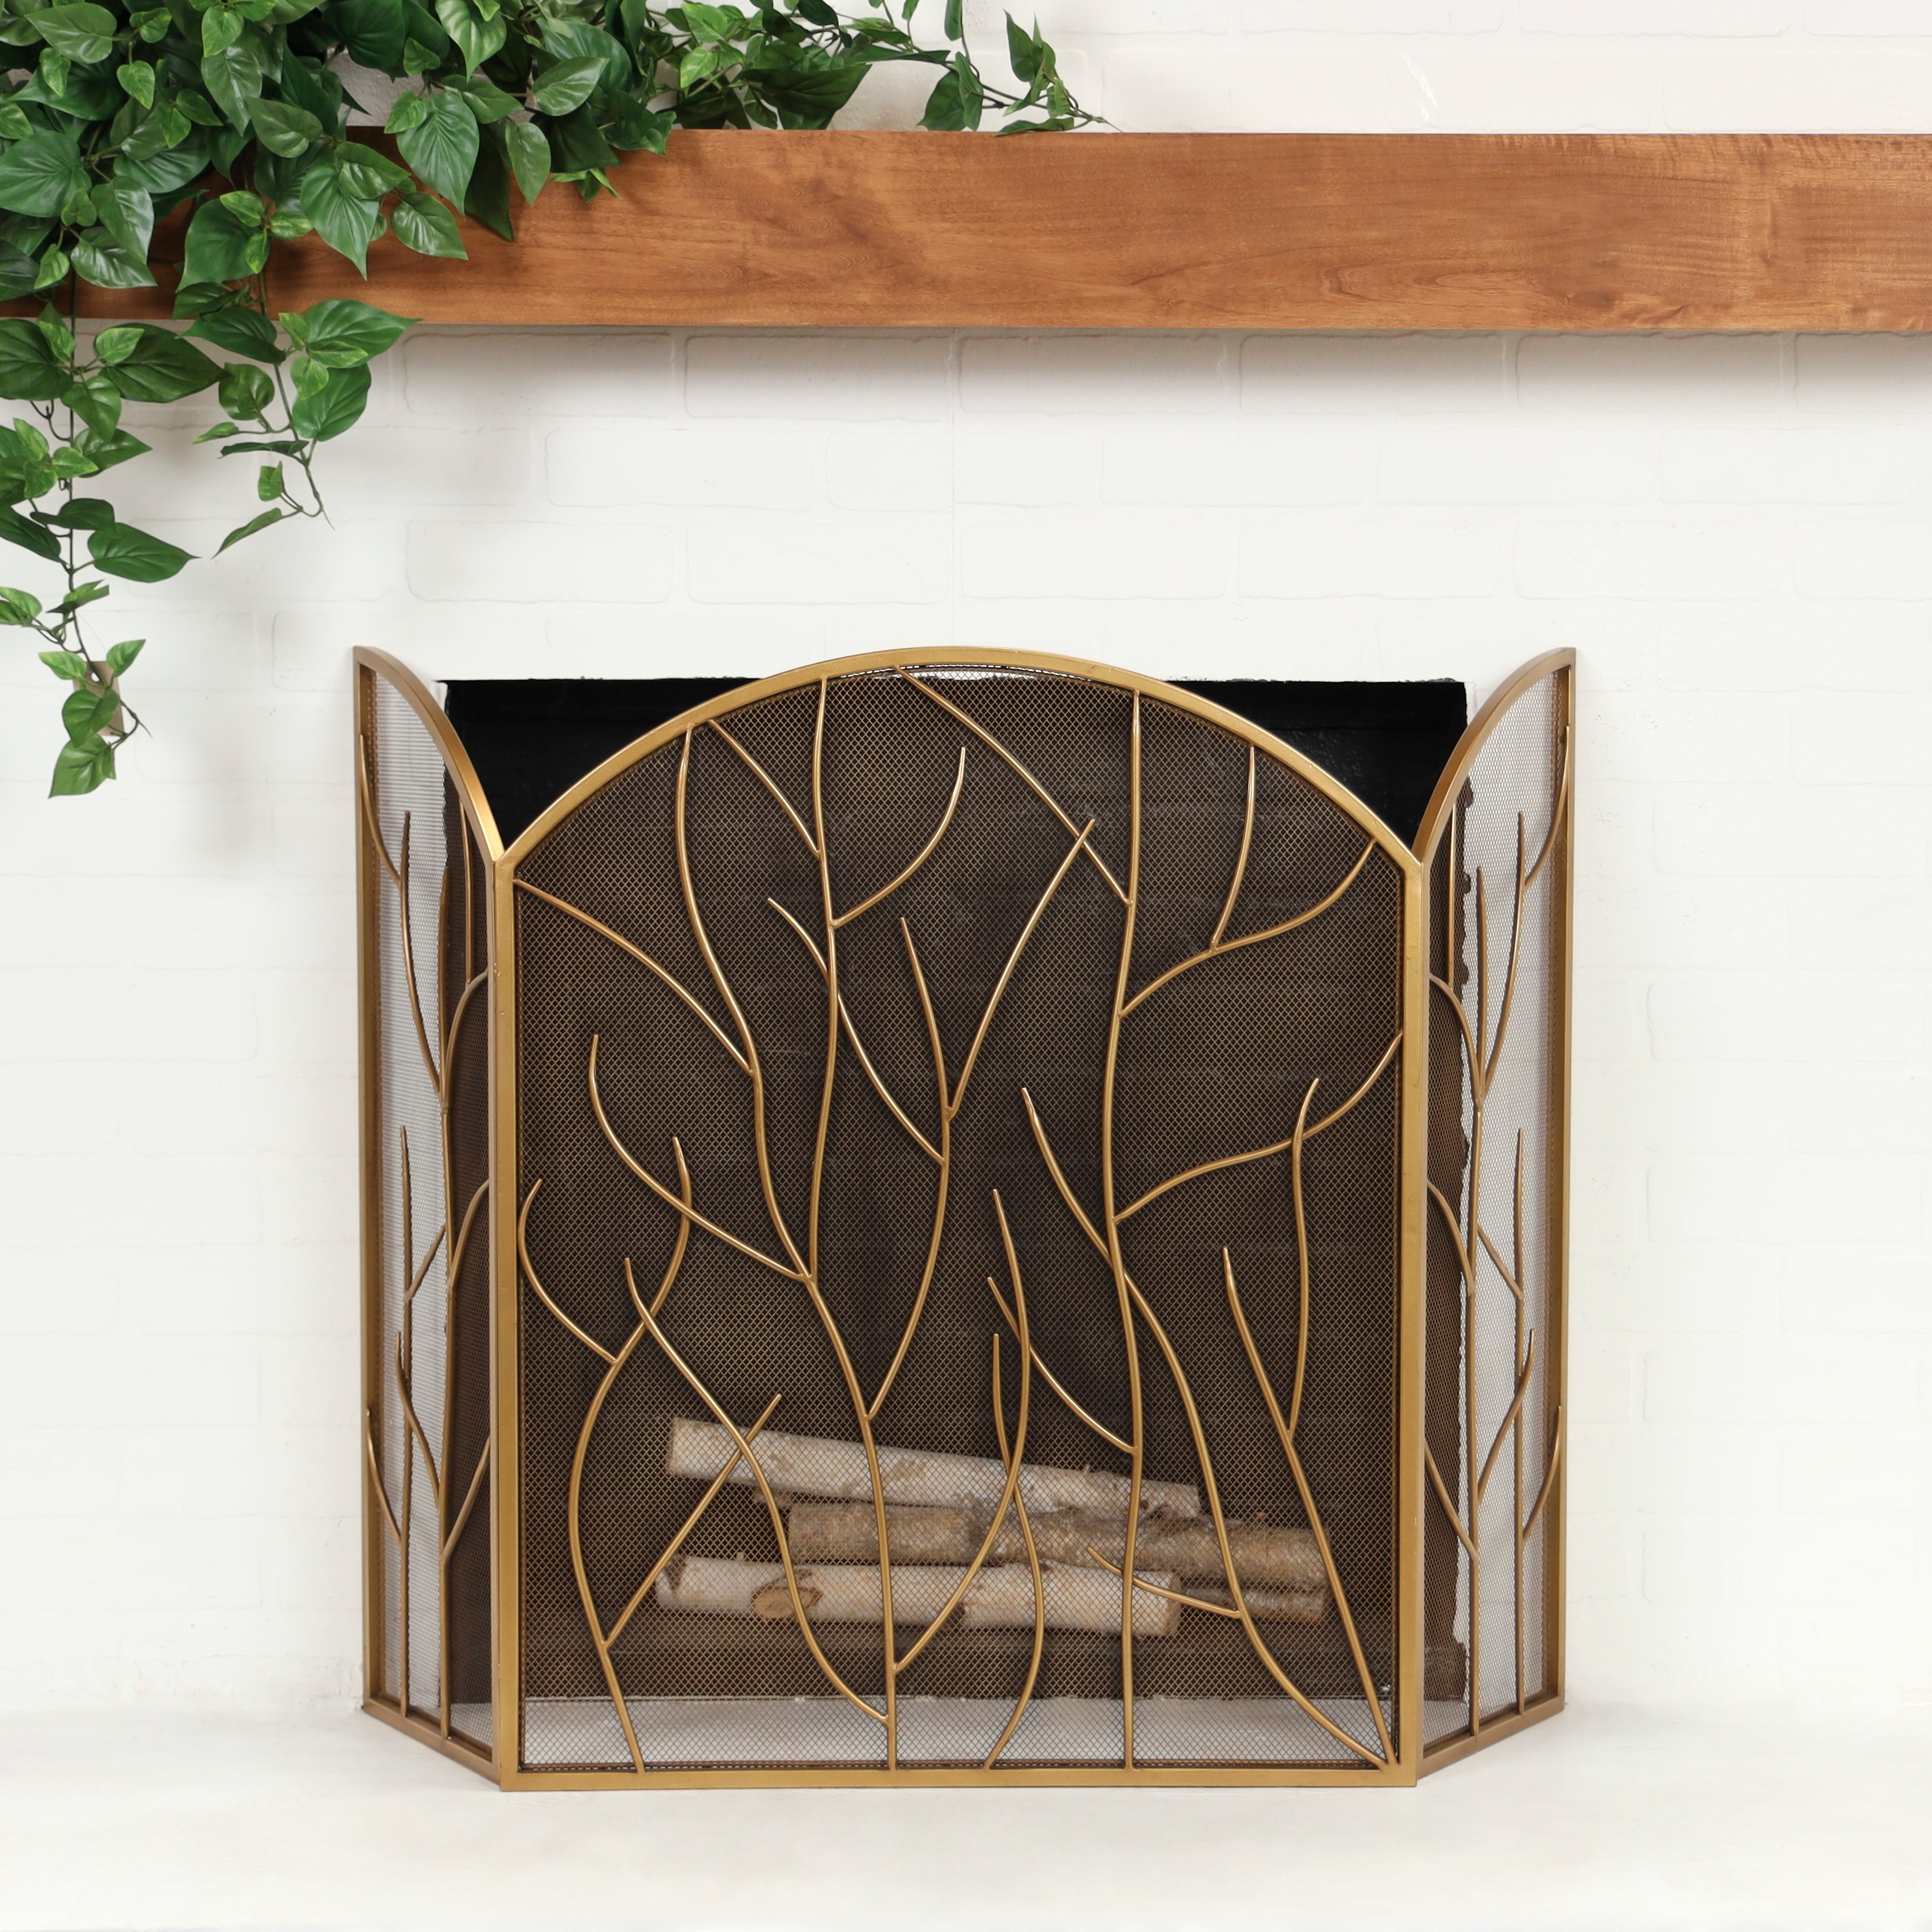 Studio 350 Gold Metal Arched 3 Panel Tree Fireplace Screen with Branch Inspired Design